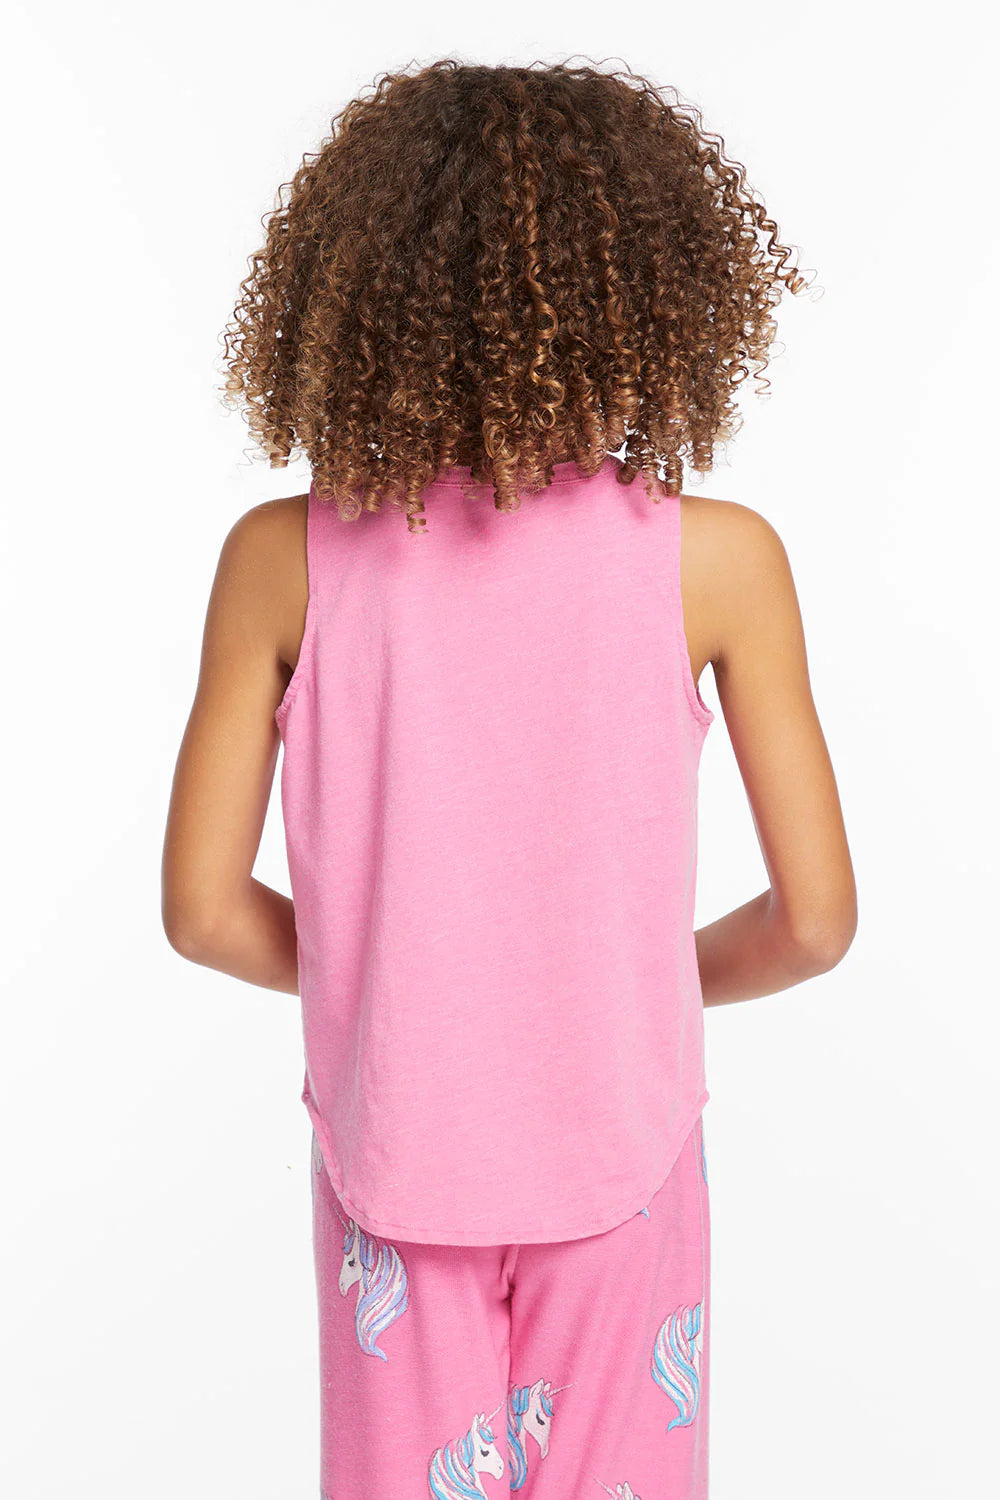 Chaser Kids Pretty Unicorn Tank in Cotton Candy